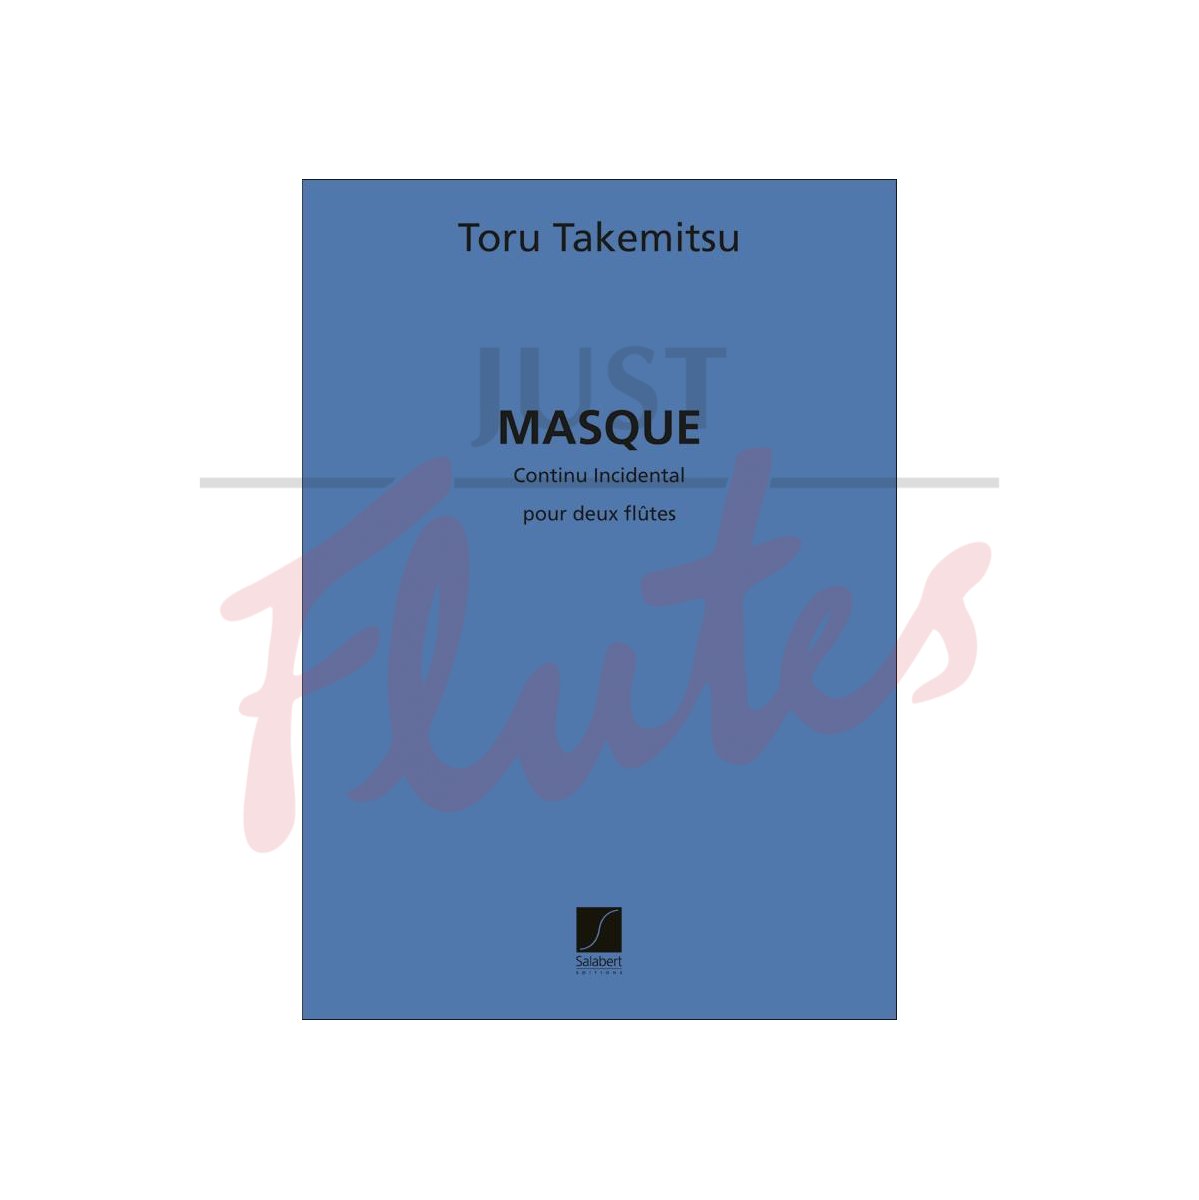 Masque: Continu &amp; Incidental for Two Flutes